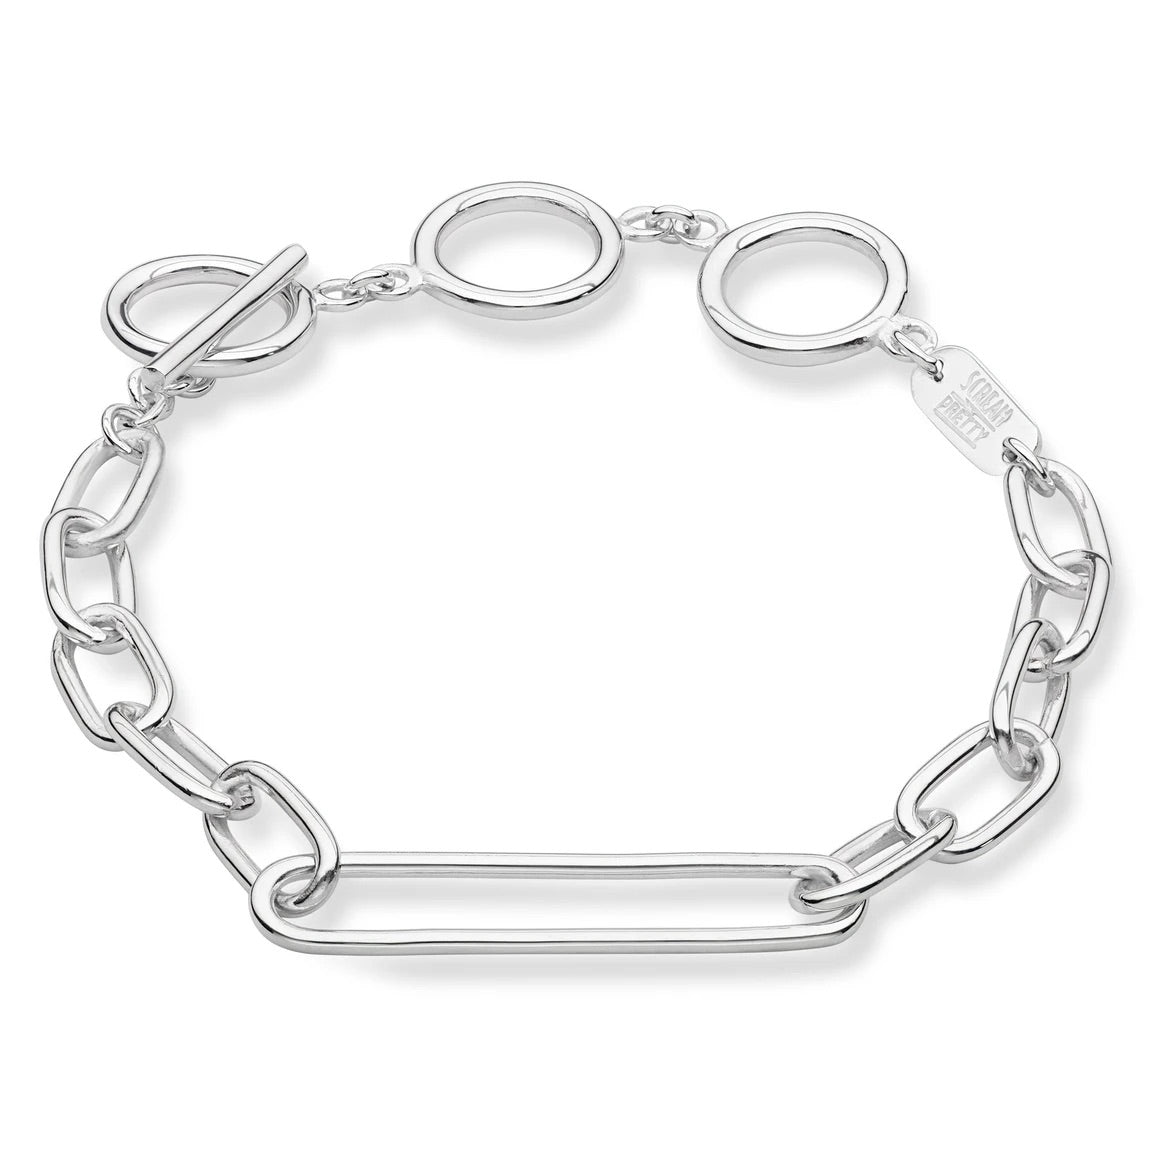 Oval chain T-bar clasp bracelet - Silver plated